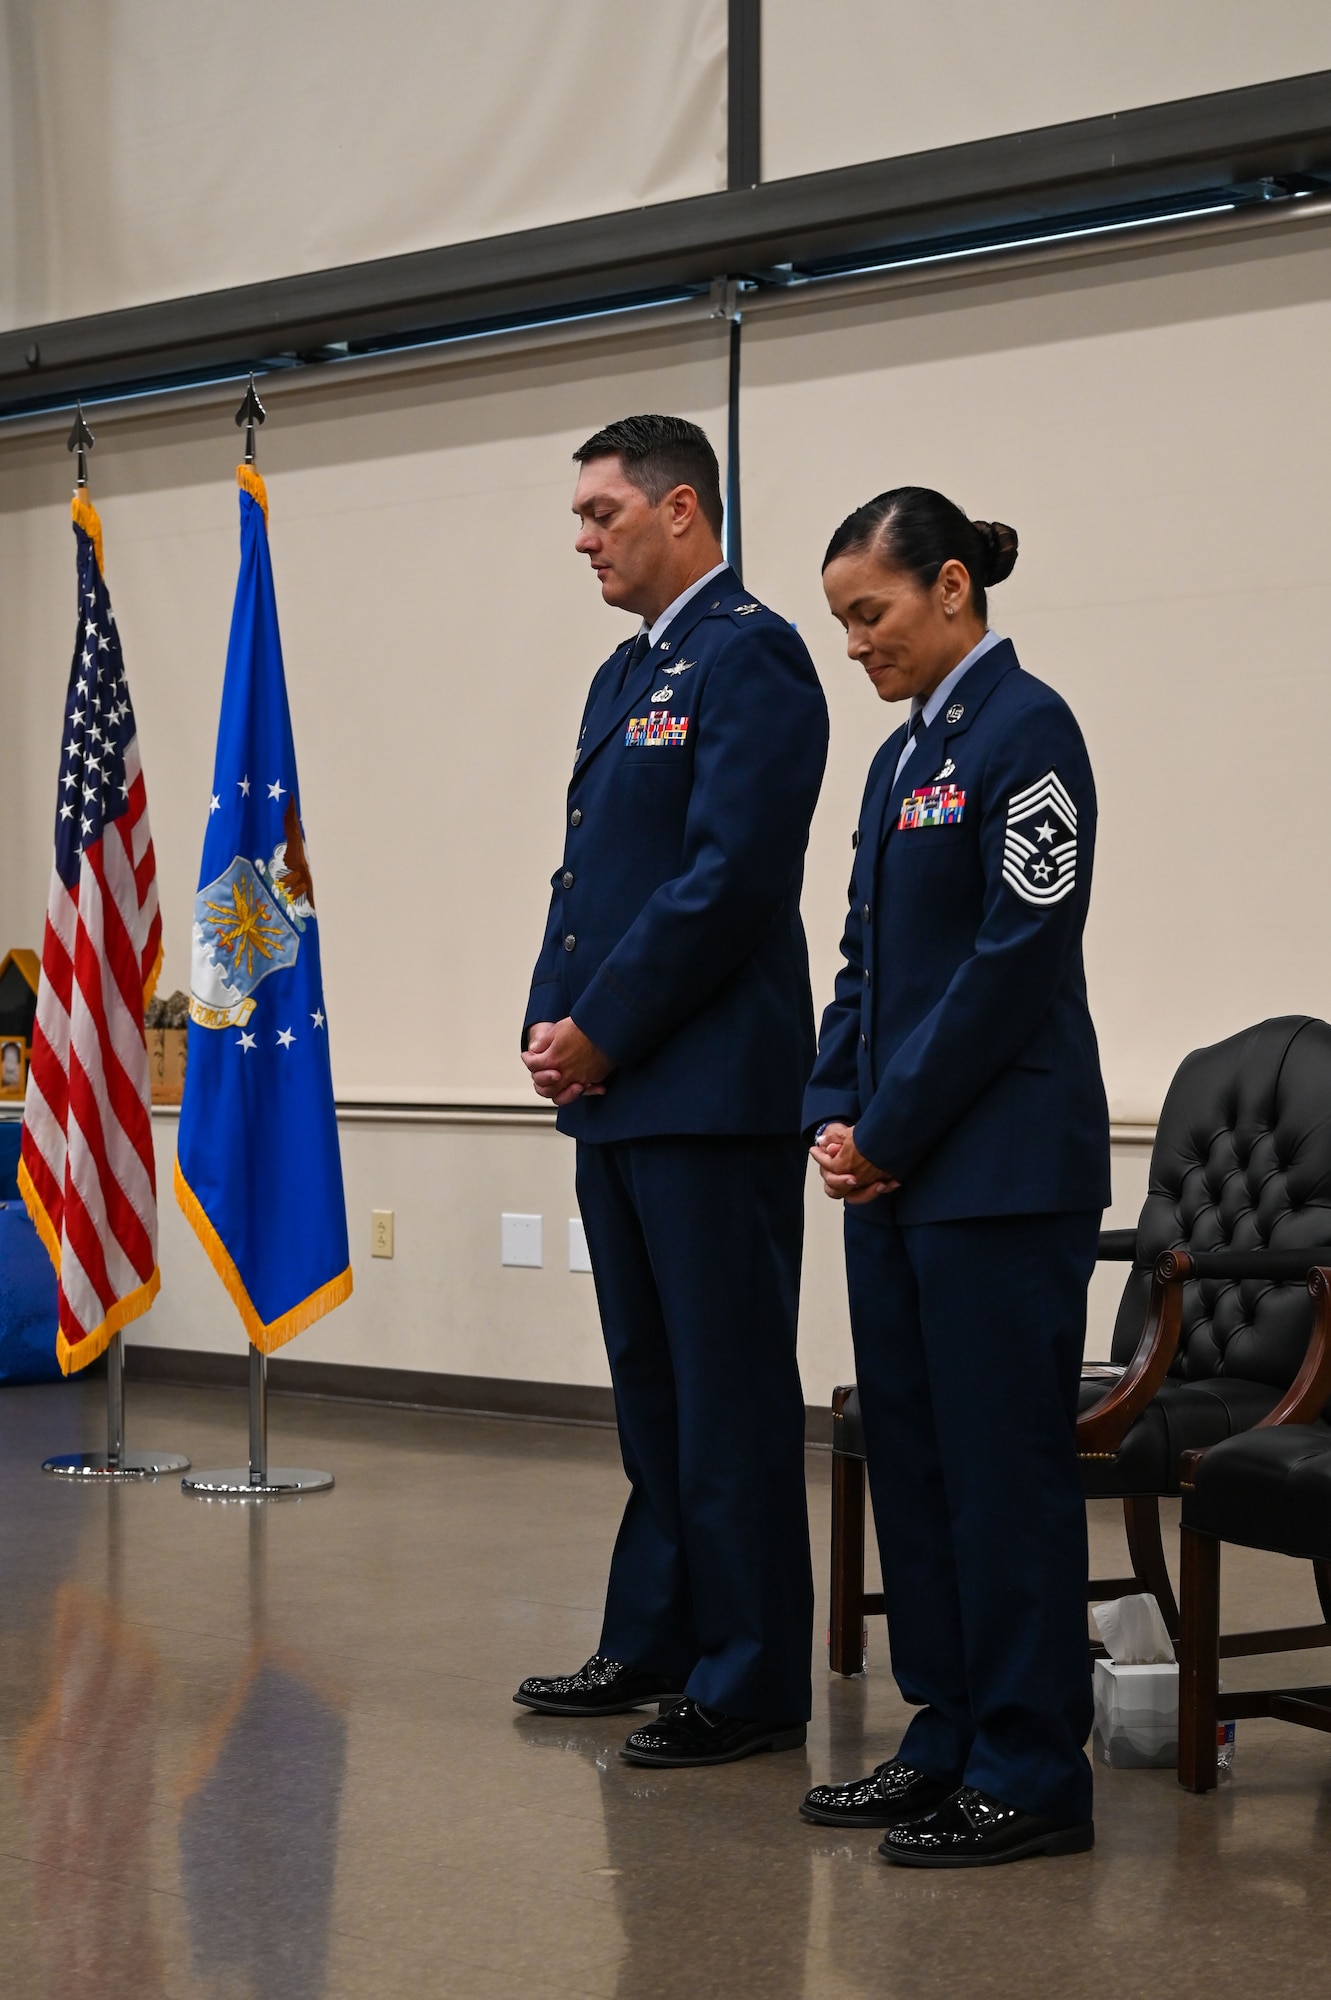 Col. Richard Erredge, 960th Cyberspace Wing commander, and Chief Master Sgt. Billie Baber, 960th CW command chief, bow their heads for the invocation during a retirement ceremony, Nov. 4, 2022, at Joint Base San Antonio-Lackland, Texas. Baber retired after dedicating 26 years to military service. (U.S. Air Force photo by Staff Sgt. Adriana Barrientos)